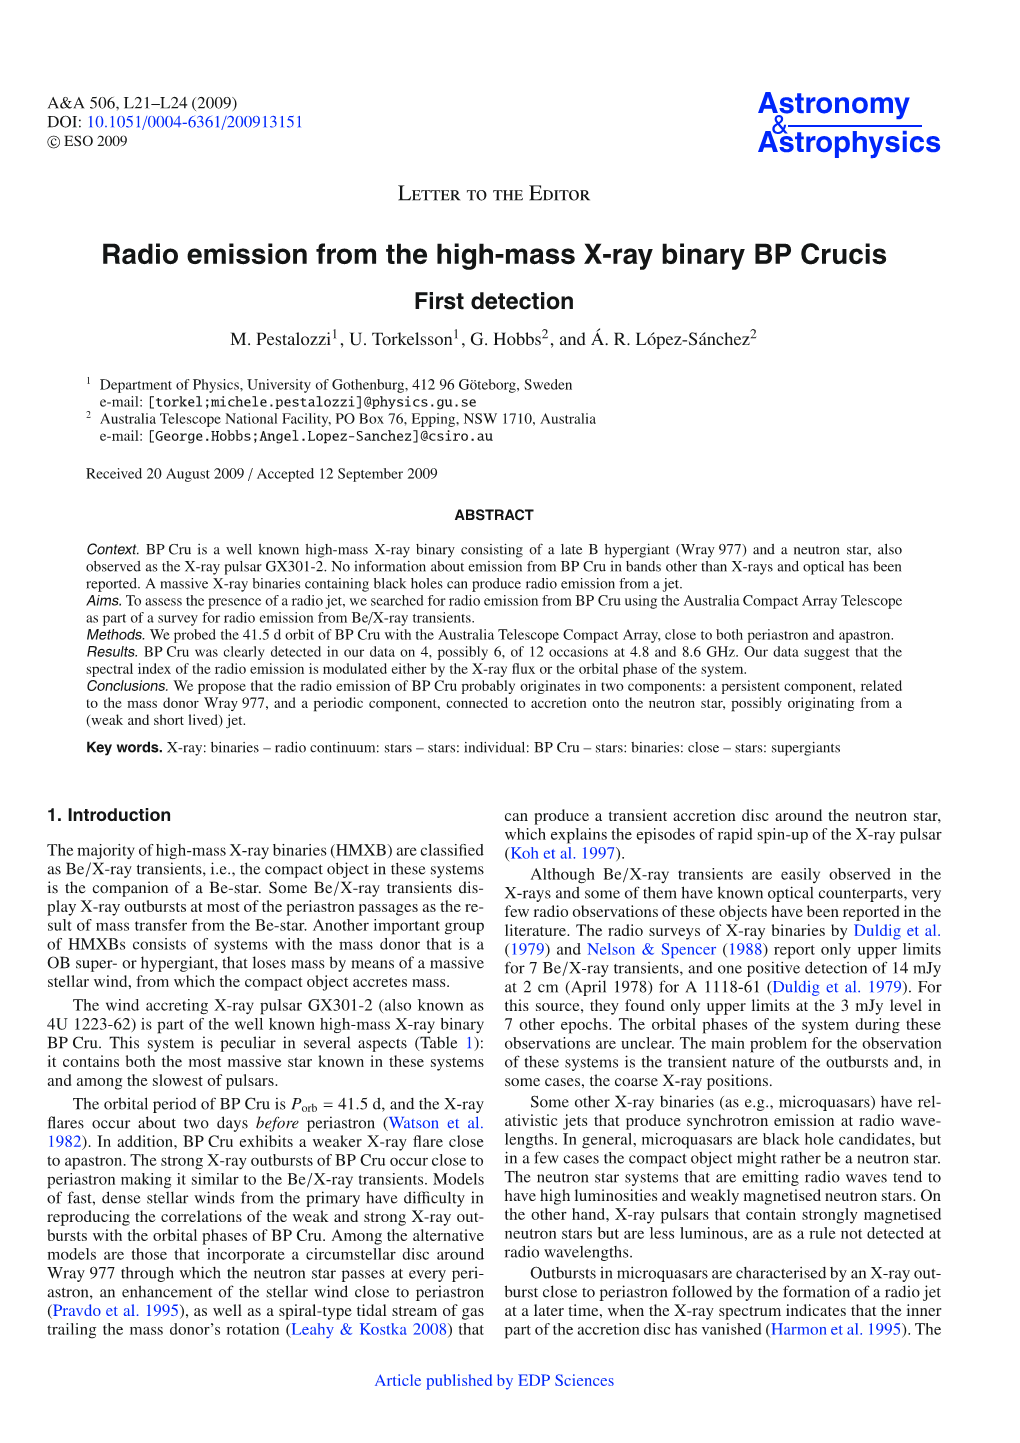 Radio Emission from the High-Mass X-Ray Binary BP Crucis First Detection M